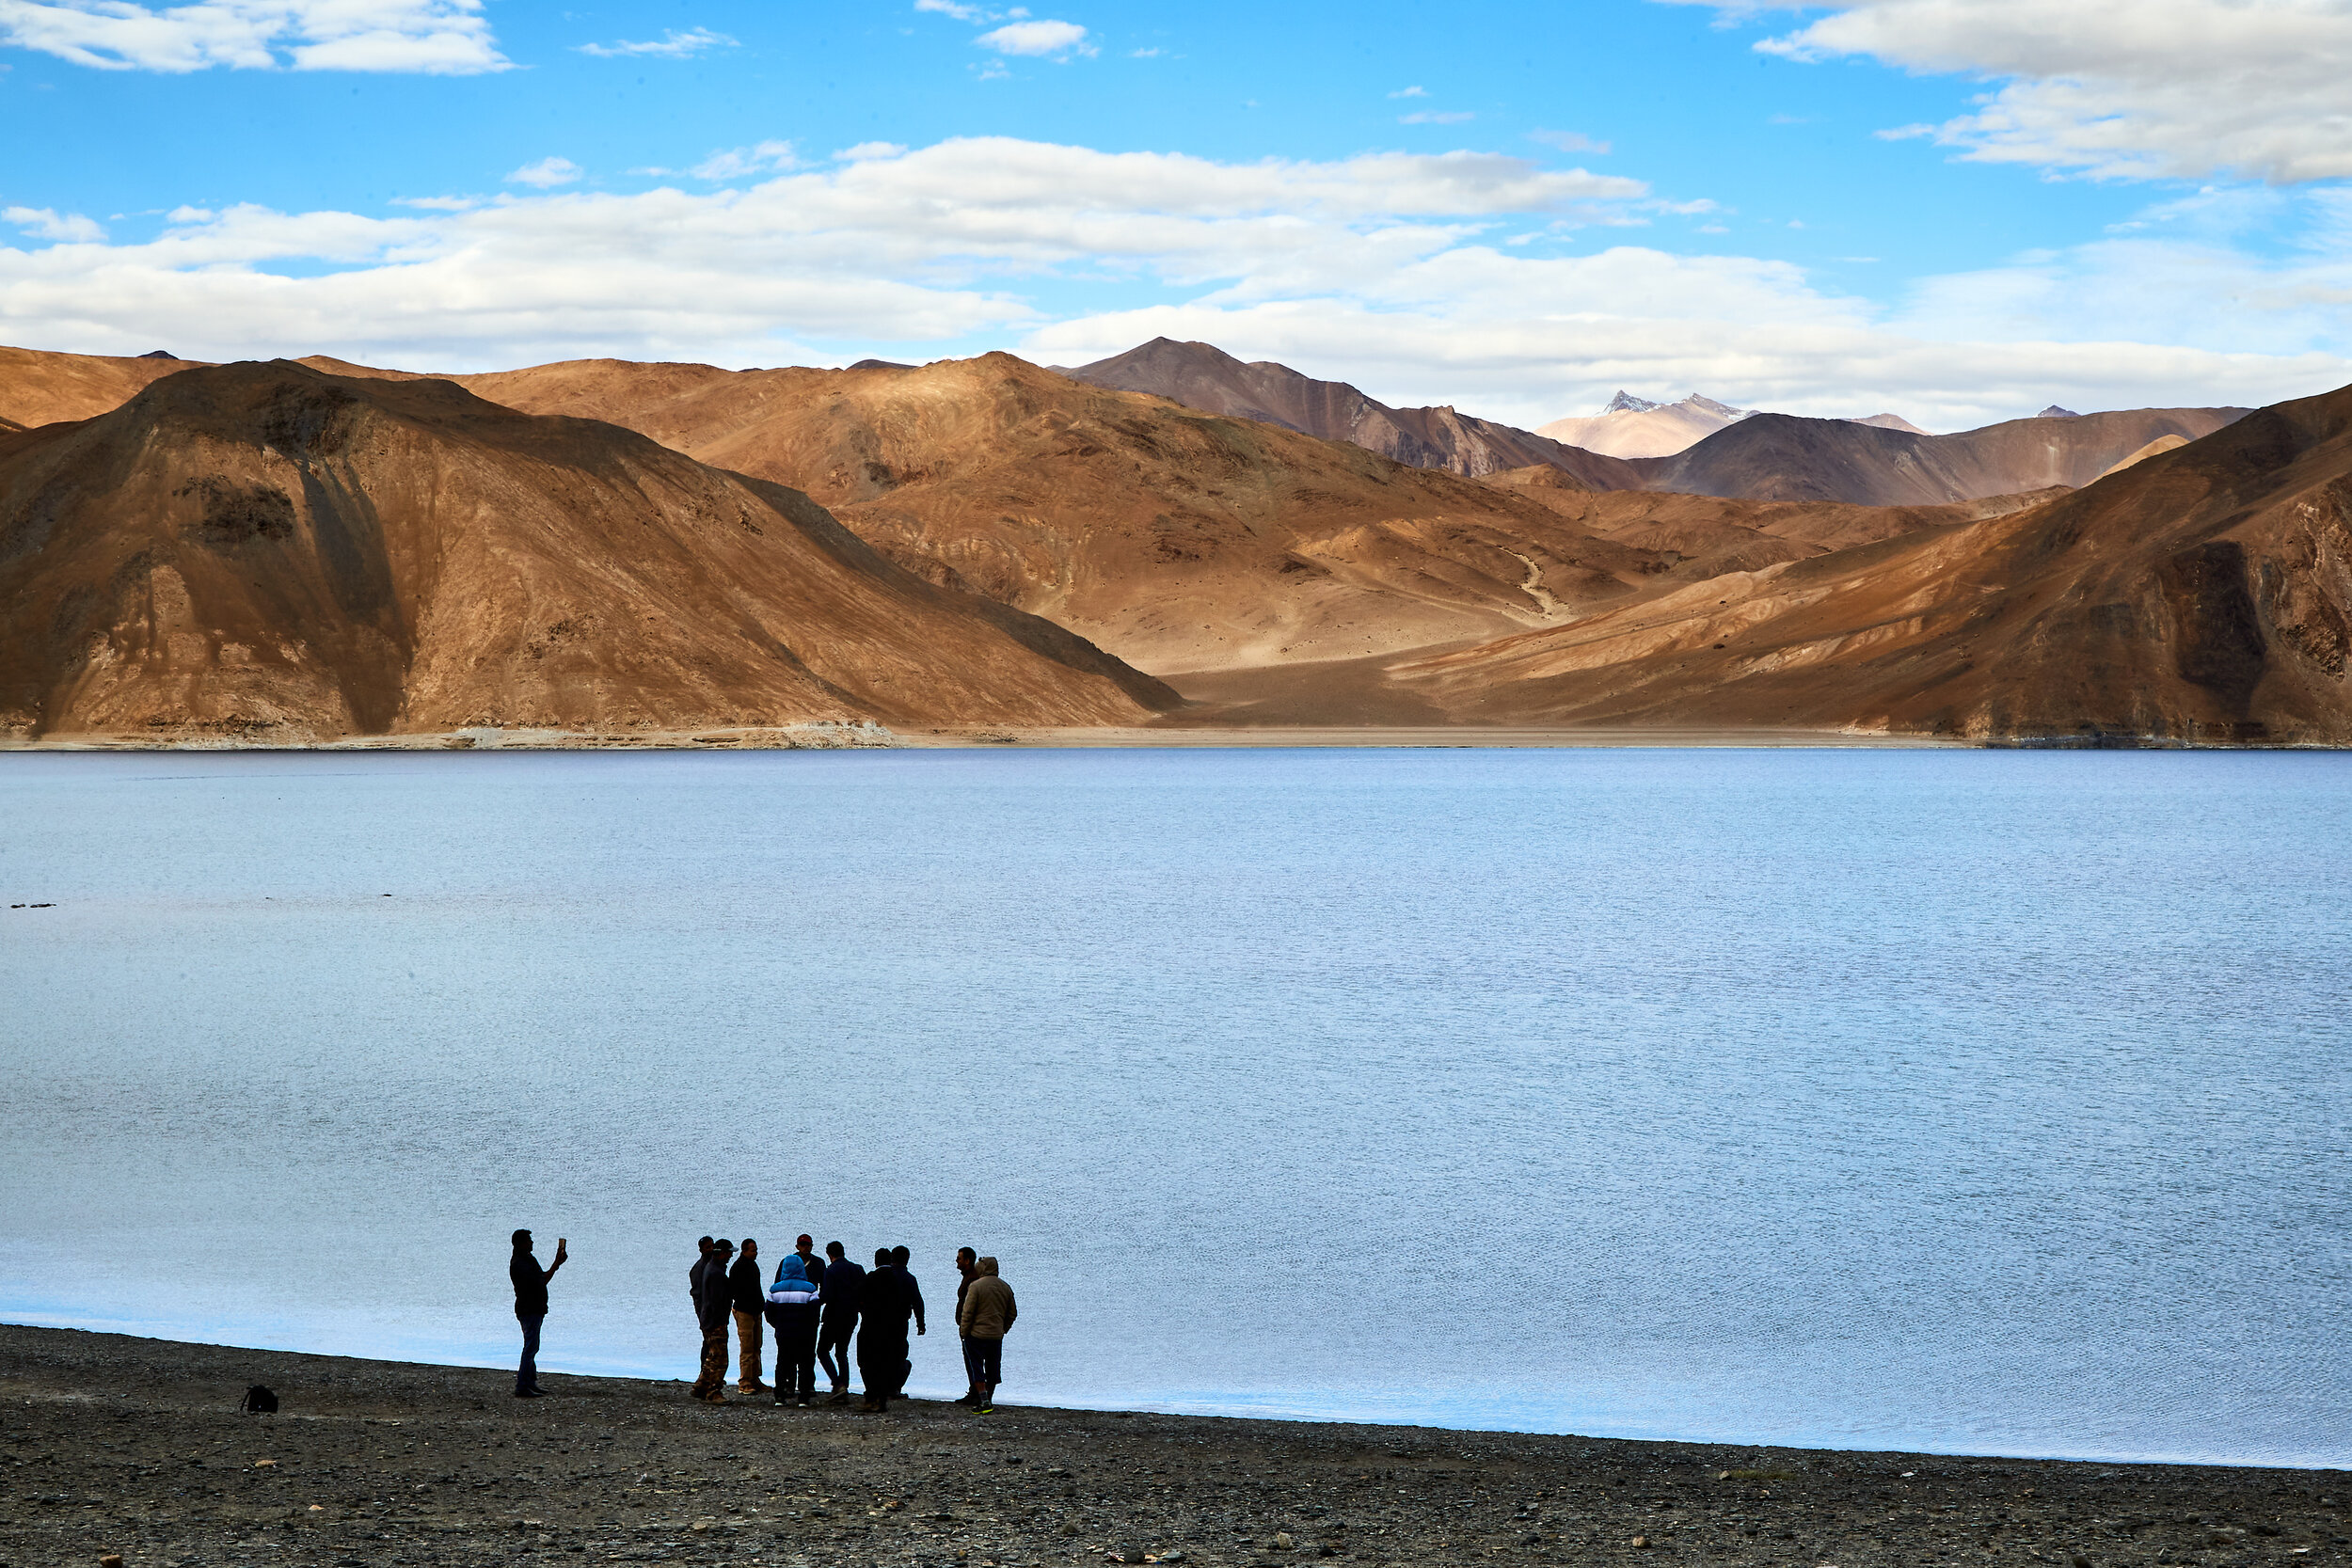  Pangong lake is the world’s highest salt water lake and extends till bordering the Tibet and China. It is also the site at which the closing scenes of the famous Three idiots film was shot. Now its occasionally being called as Three idiots lake and 